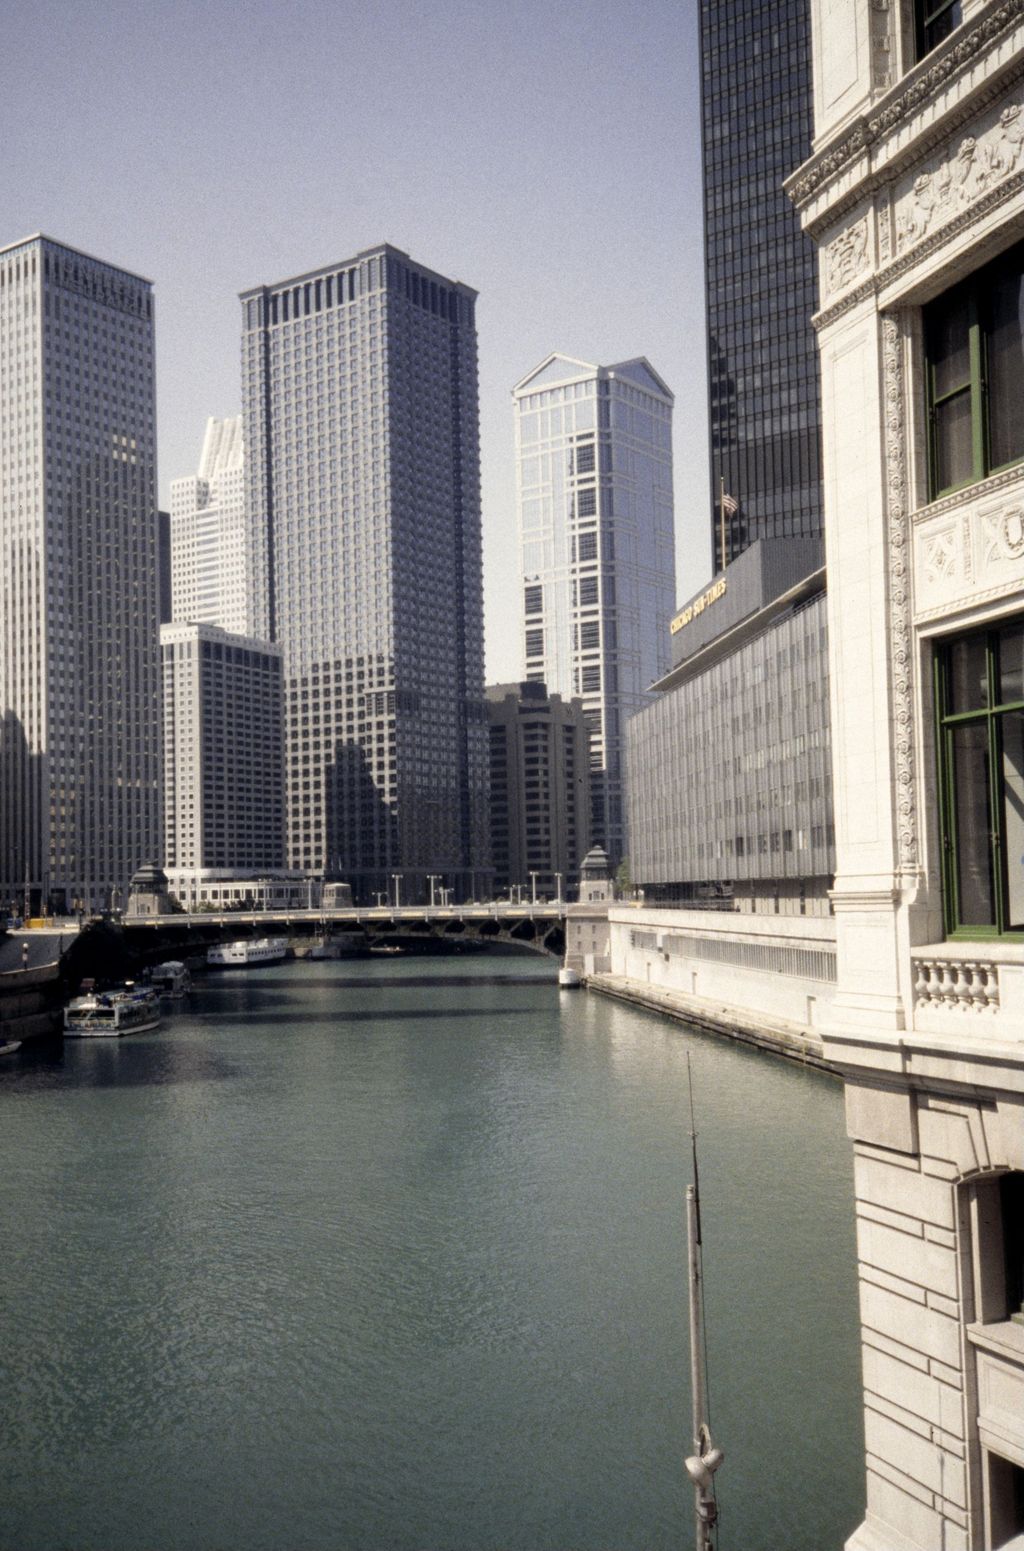 Chicago River and skyscrapers along Wacker Drive